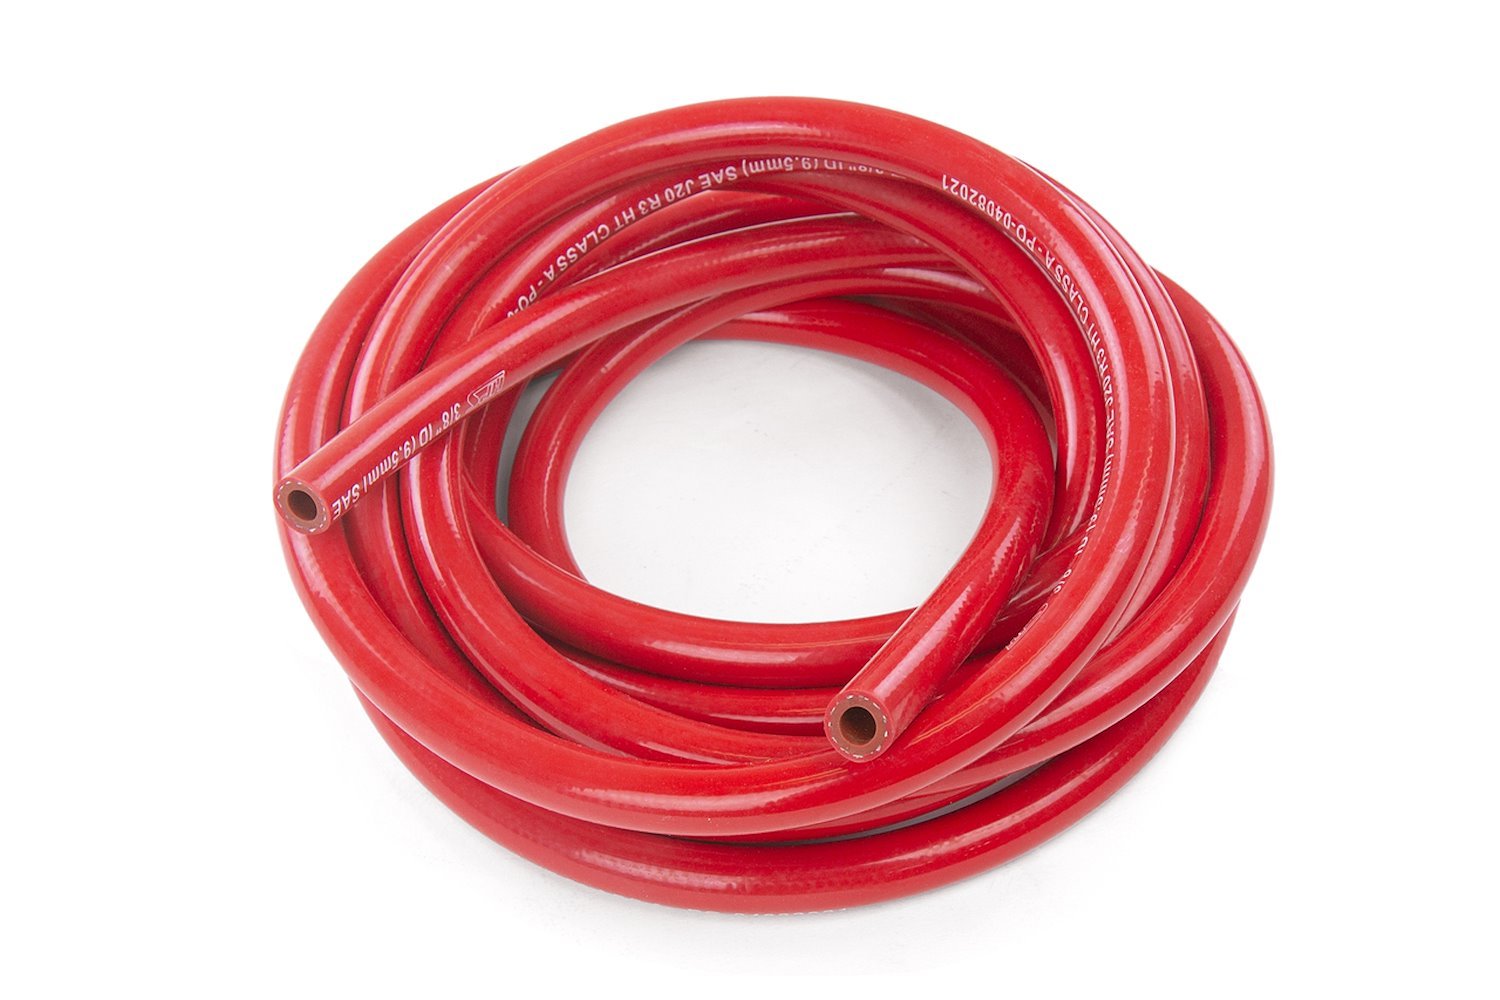 HTHH-075-REDx25 Silicone Heater Hose Tubing, High-Temp 1-Ply Reinforced, 3/4 in. ID, 25 ft. Roll, Red